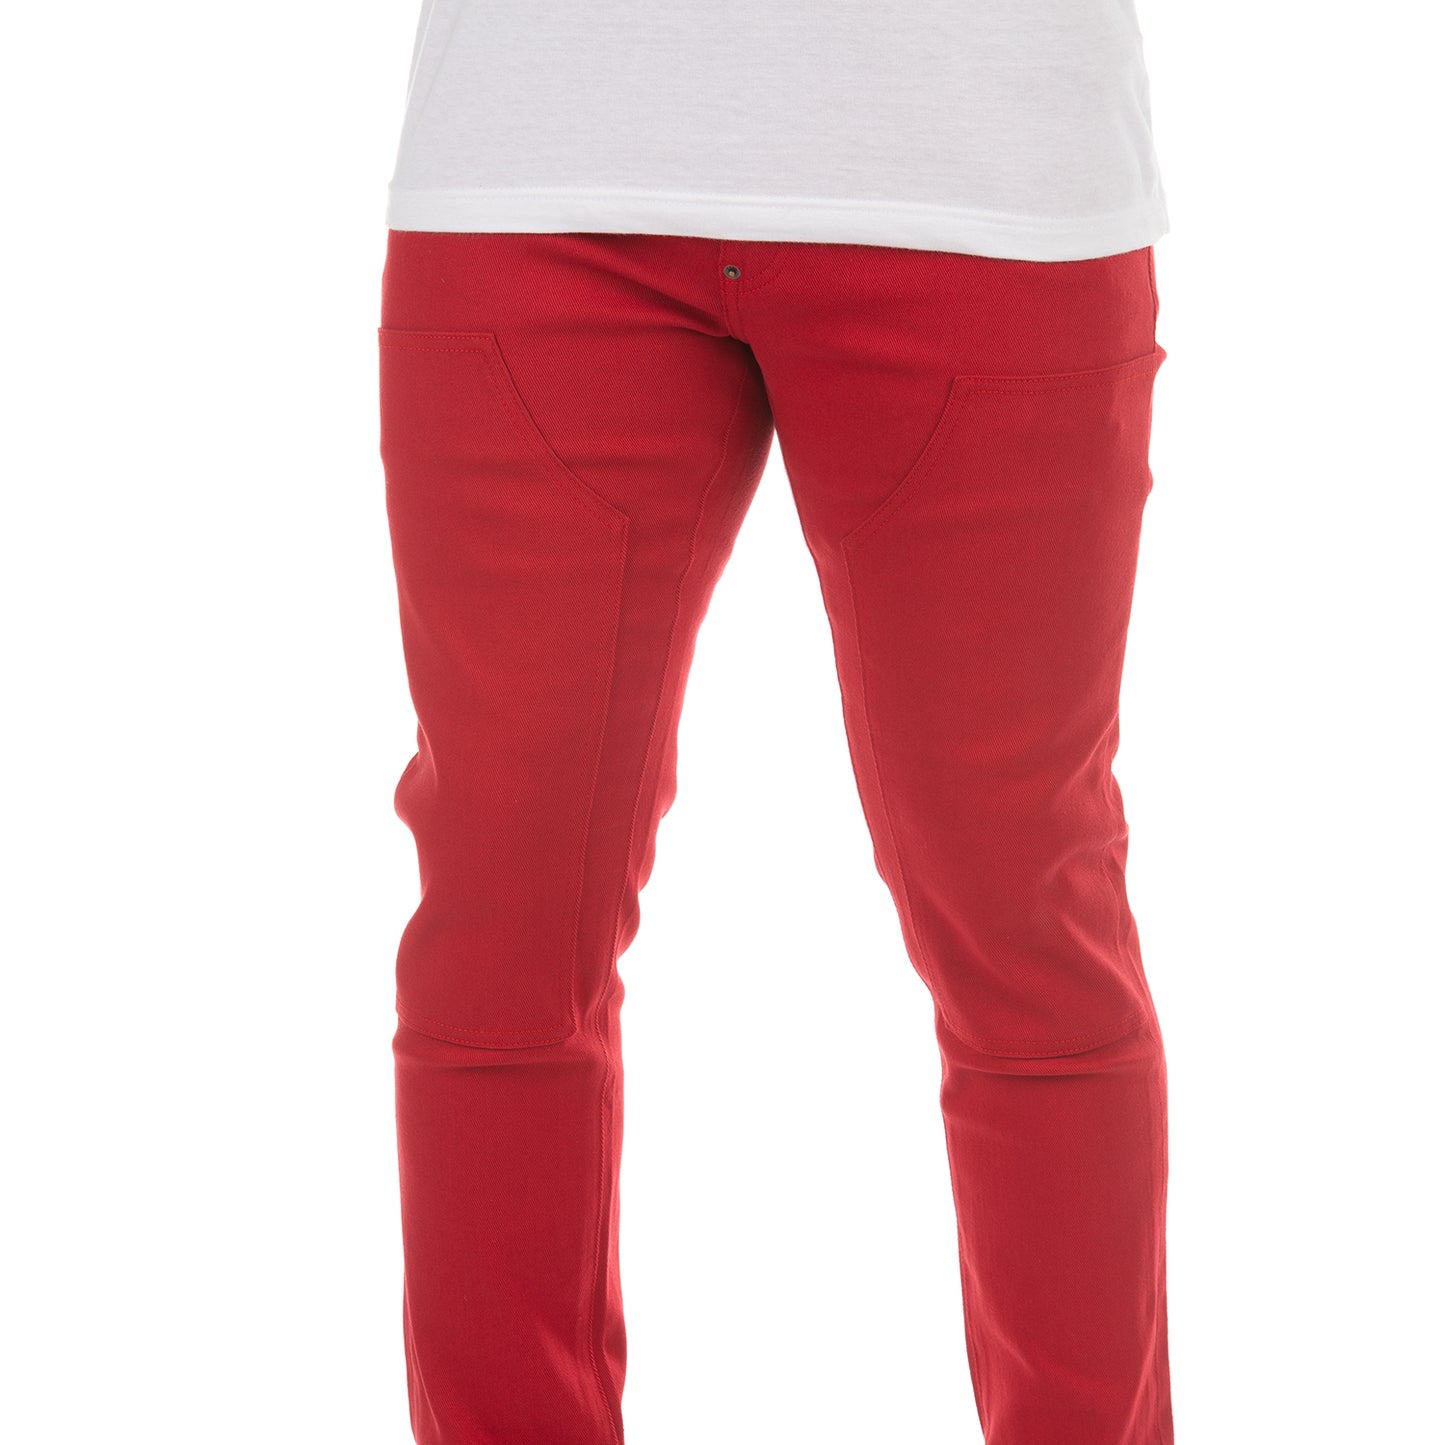 Akoo Mens Cypher Pant (Delinquent Fit) (Chili Pepper)